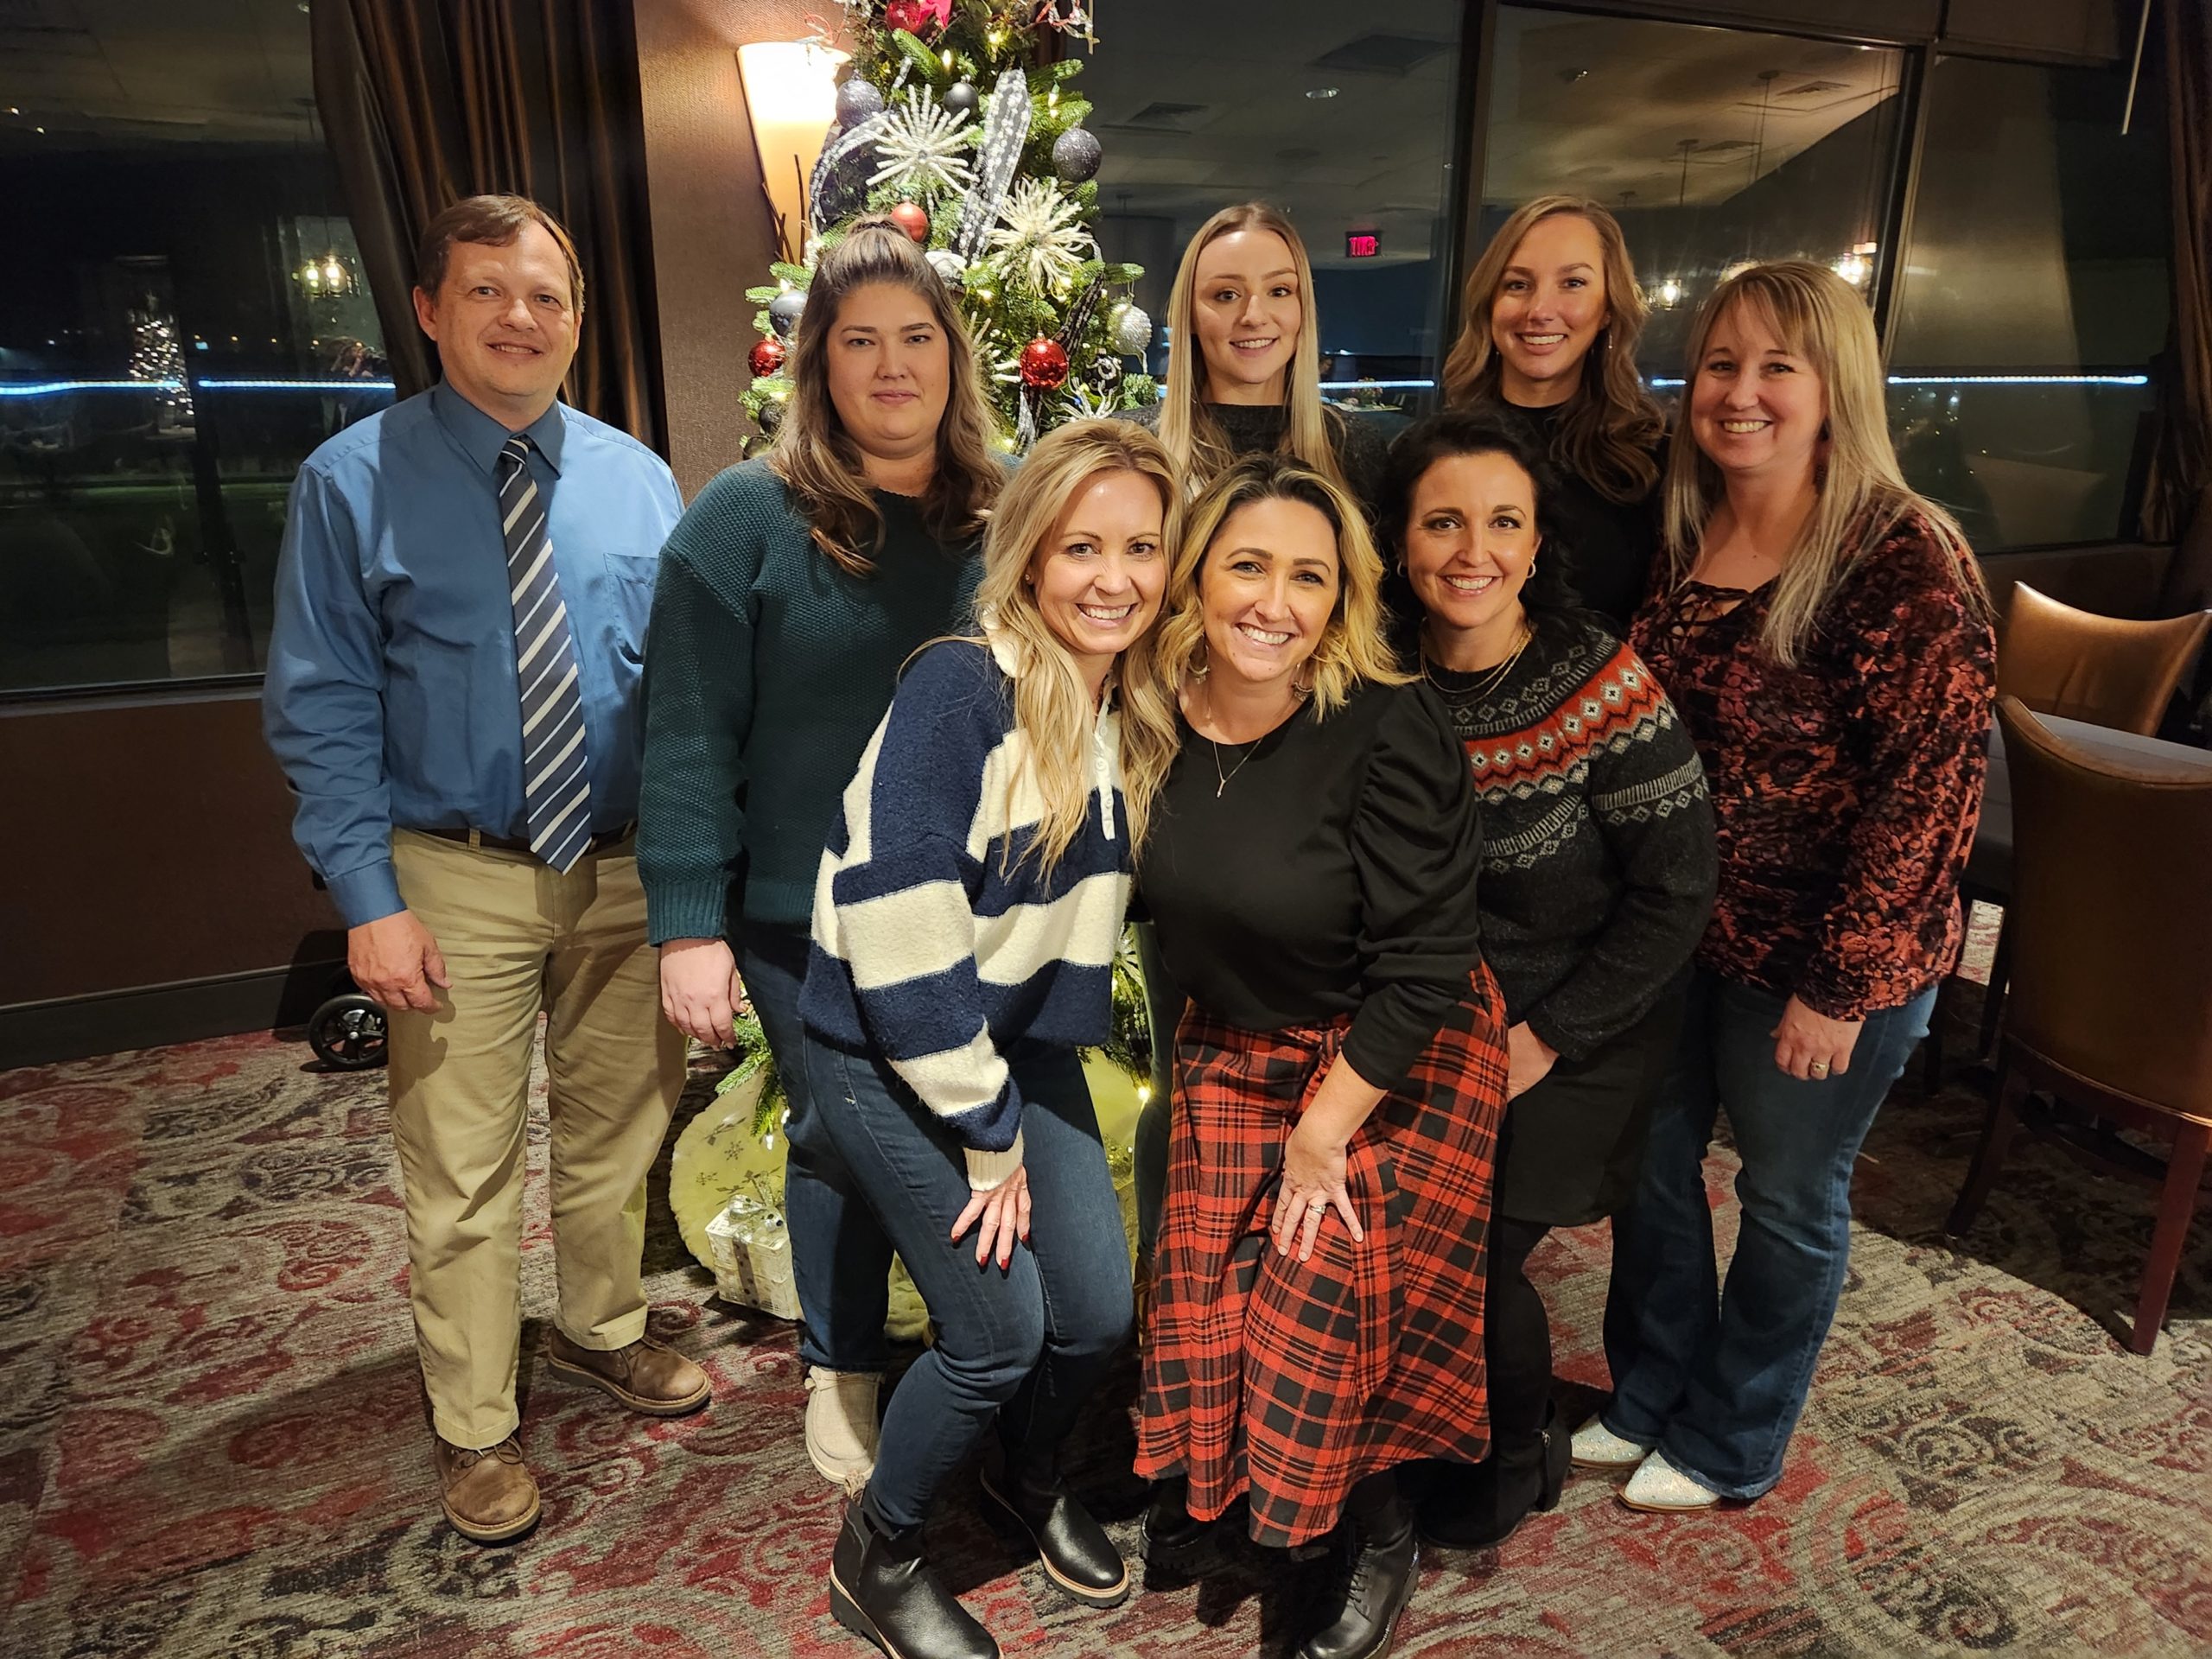 The entire dental team of Fourth Street Family Dental posing together in front of a Christmas tree in a high rise building in Hermiston, OR